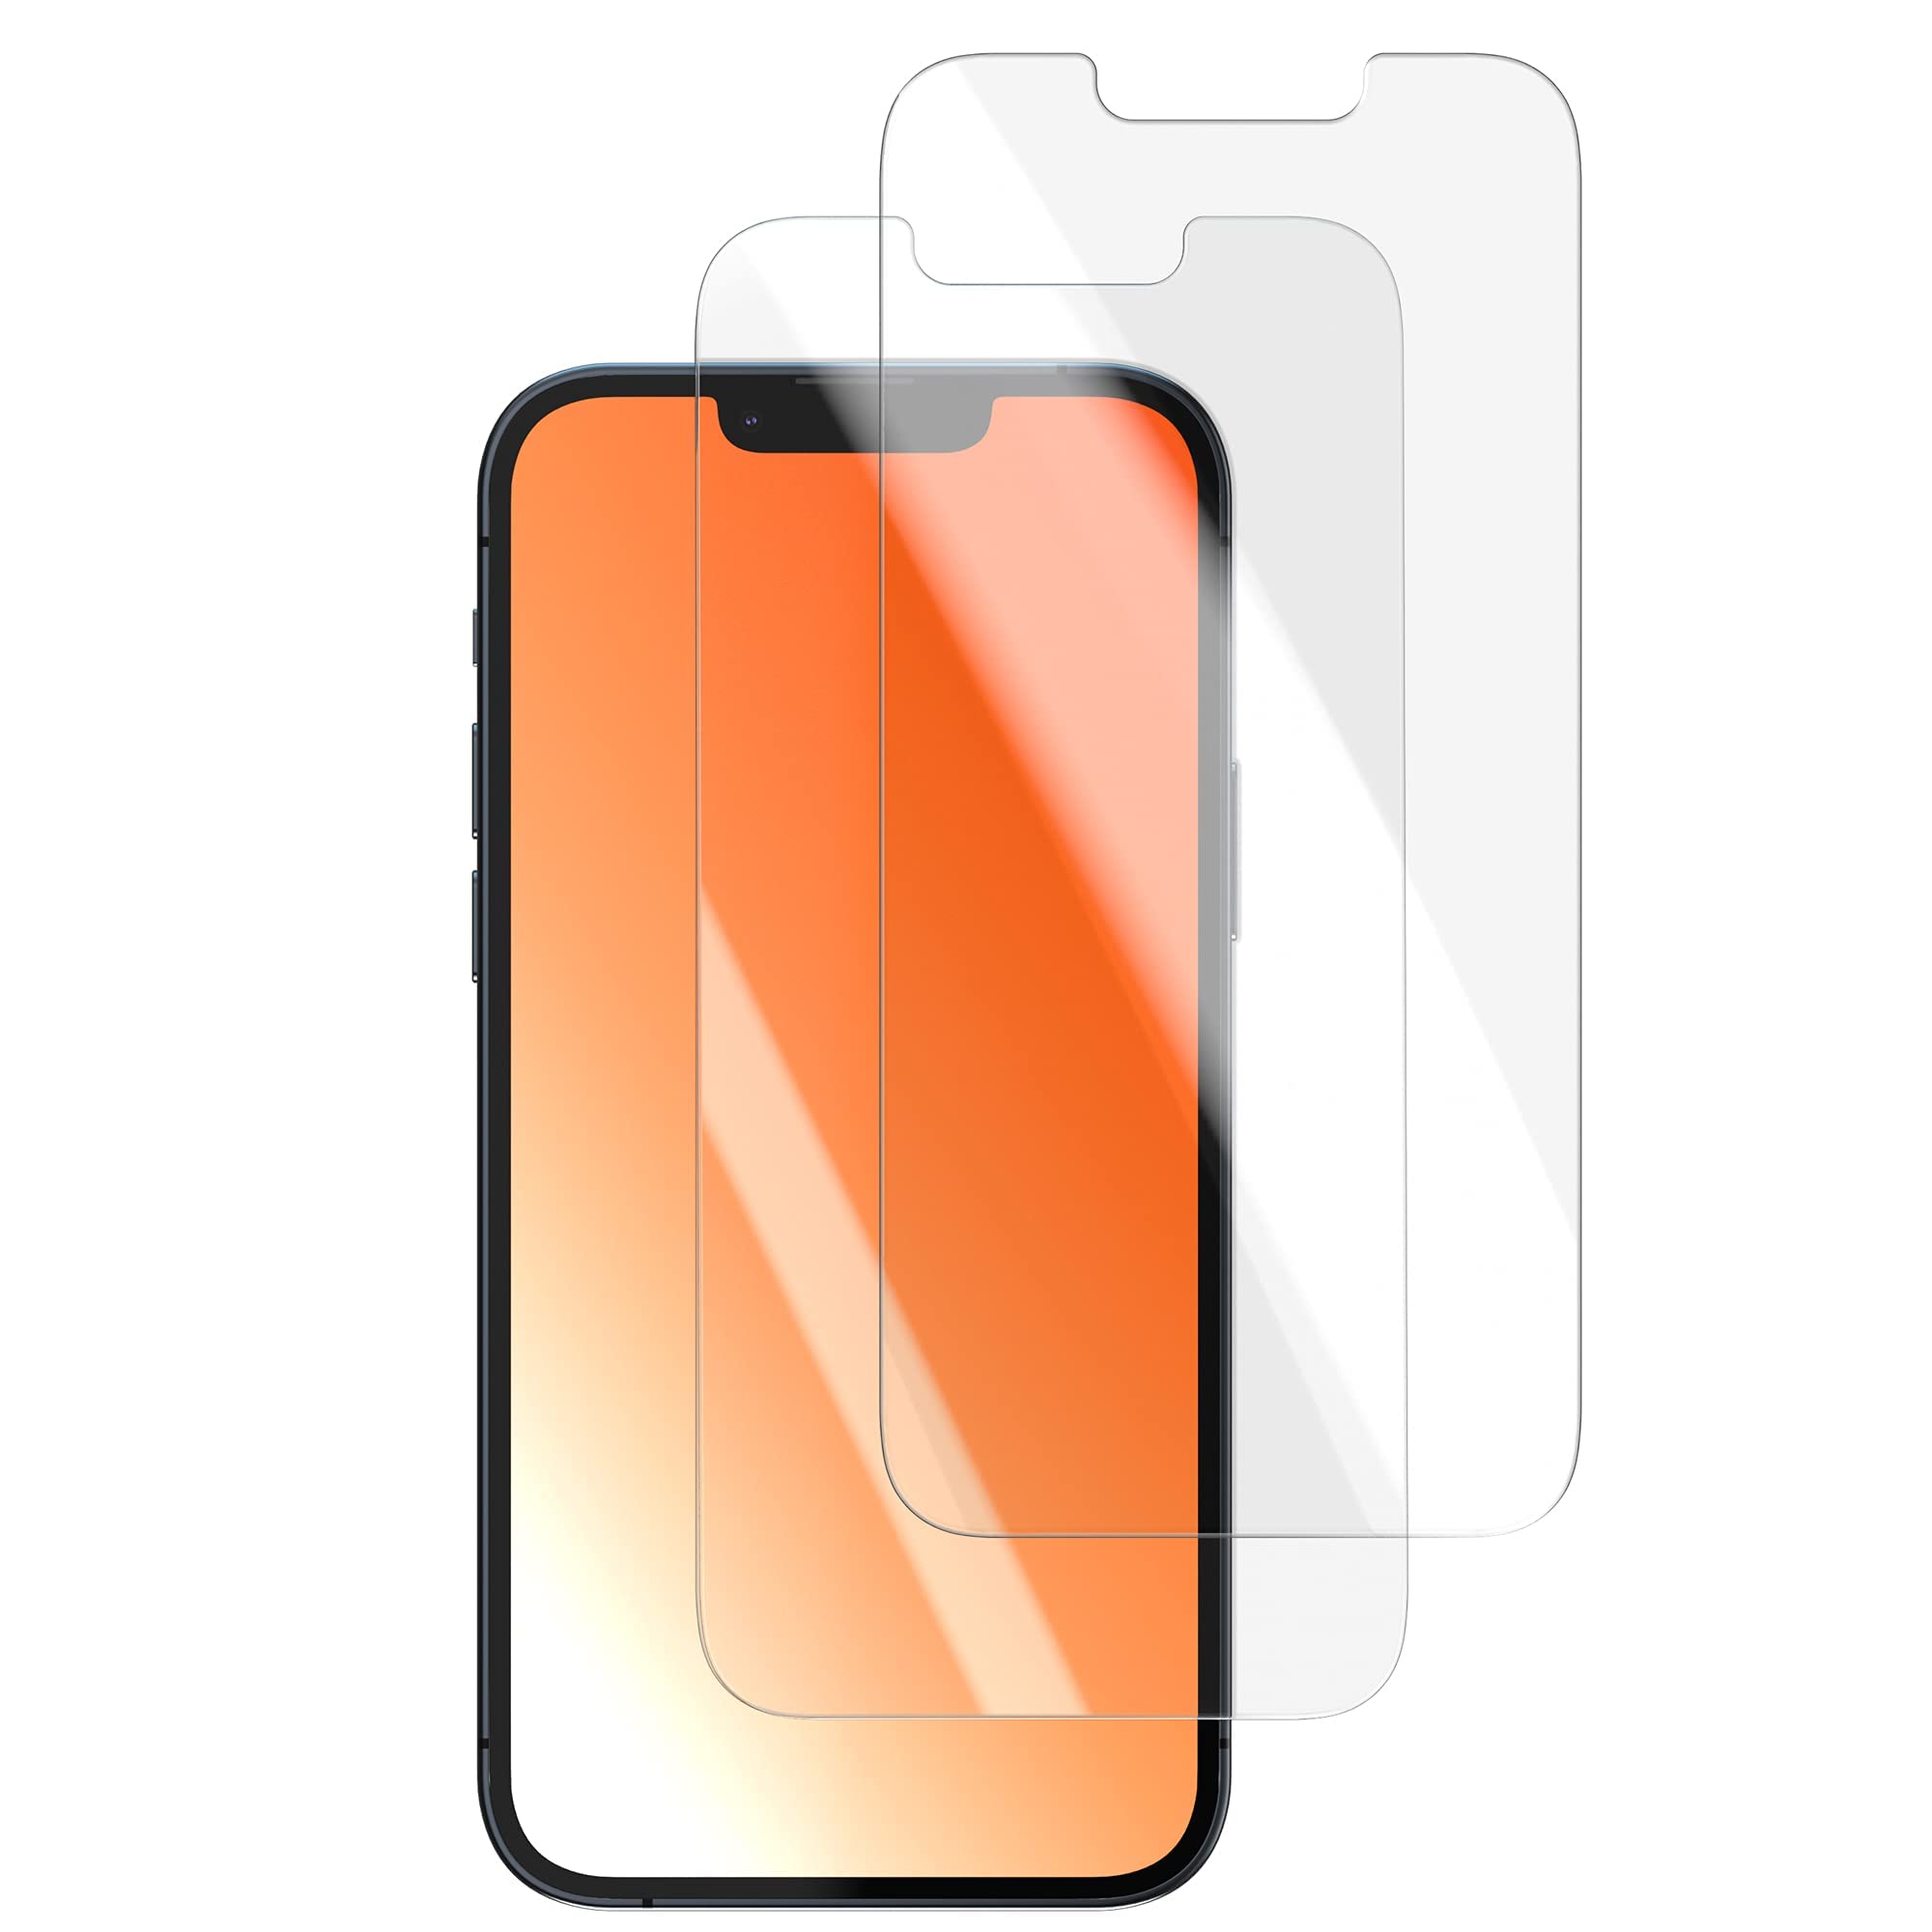 screen-protector-compatibility-finding-the-right-screen-protector-for-iphone-11